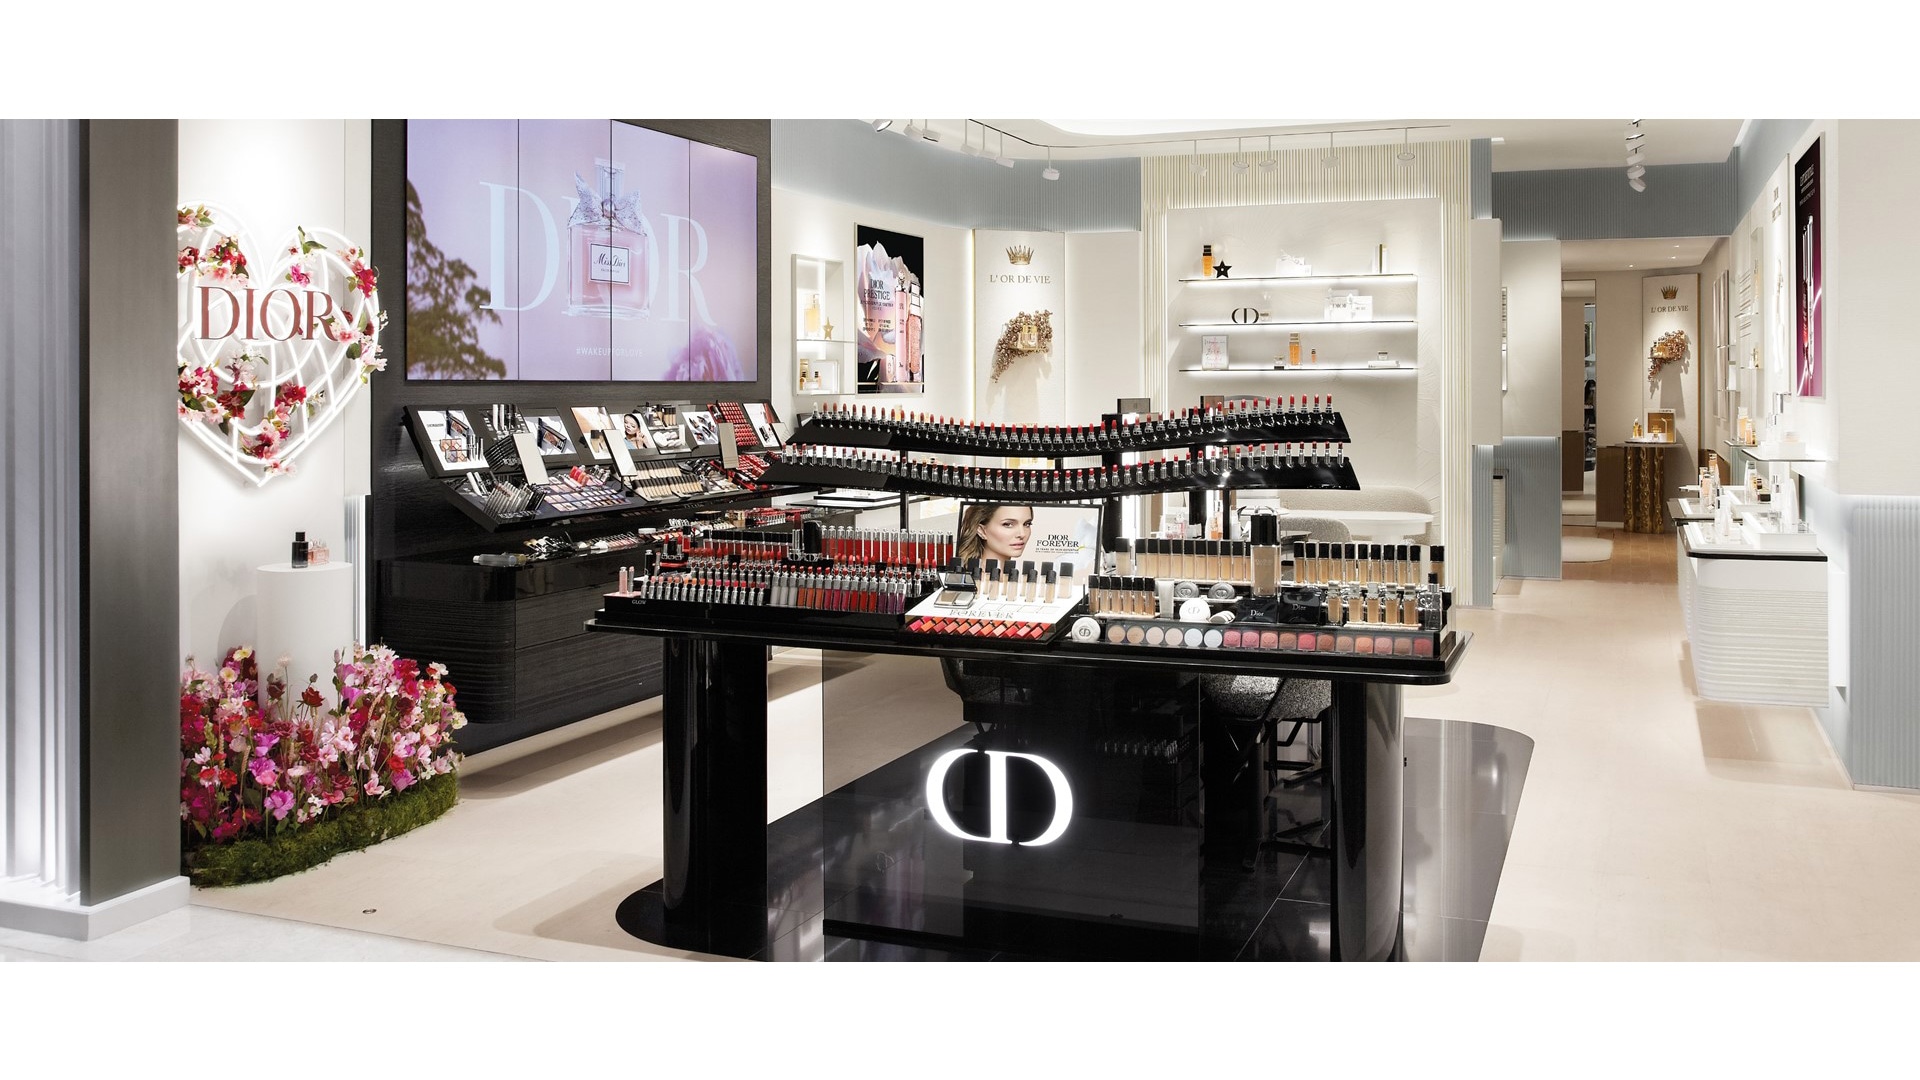 Dior Stores in Singapore  18 Locations  Opening Hours  SHOPSinSG